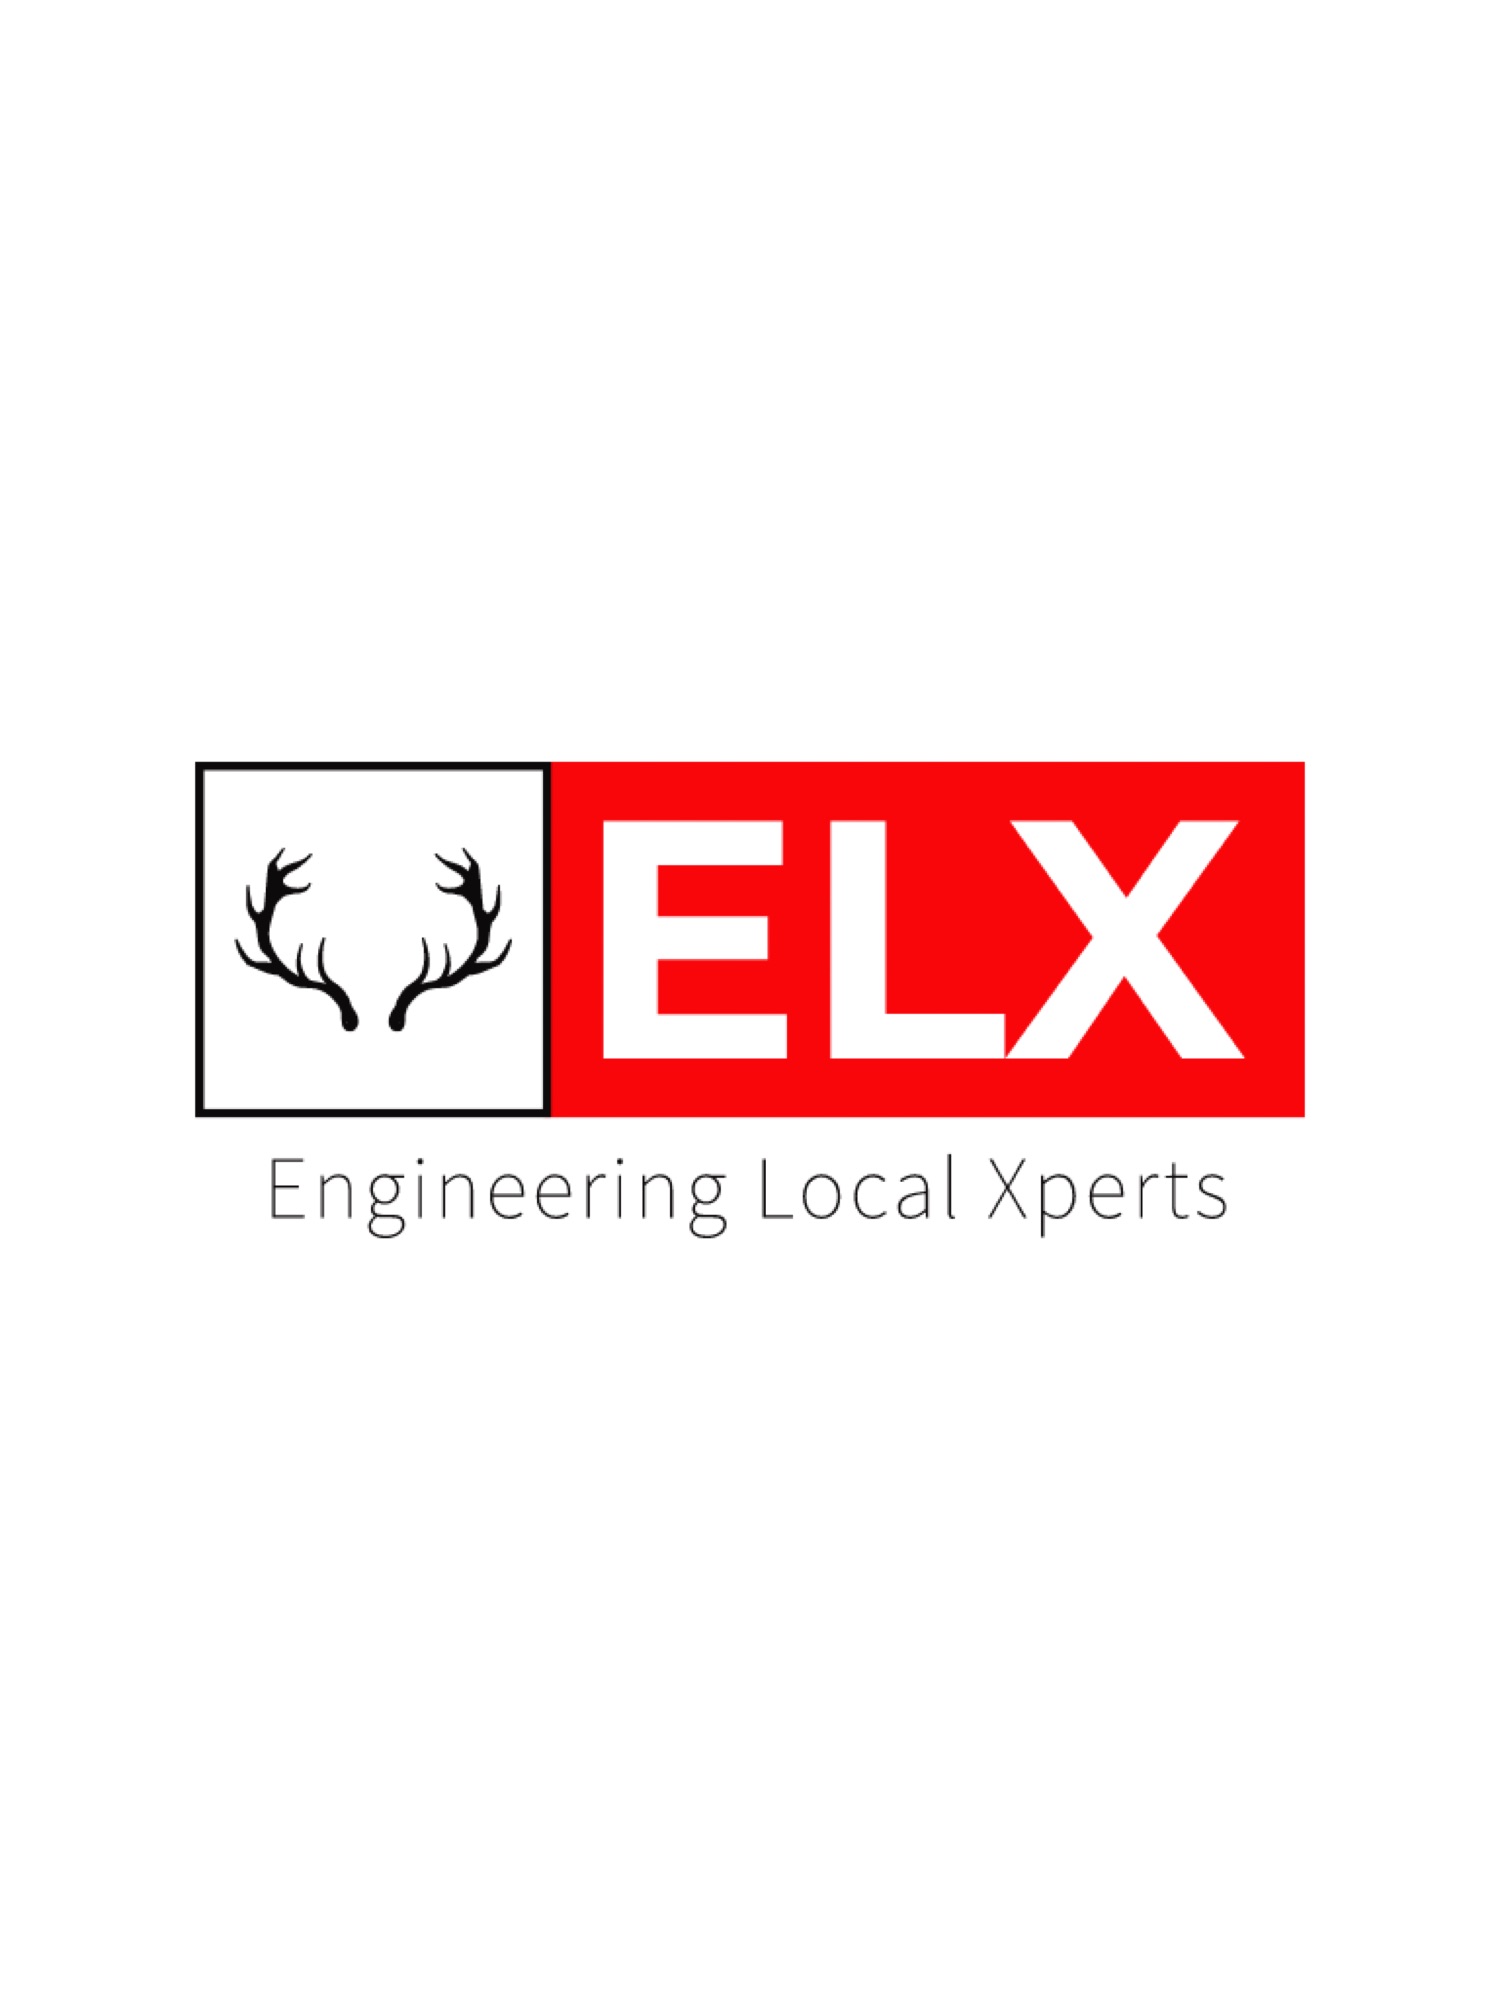 ELX - Engineering Local Xperts Logo